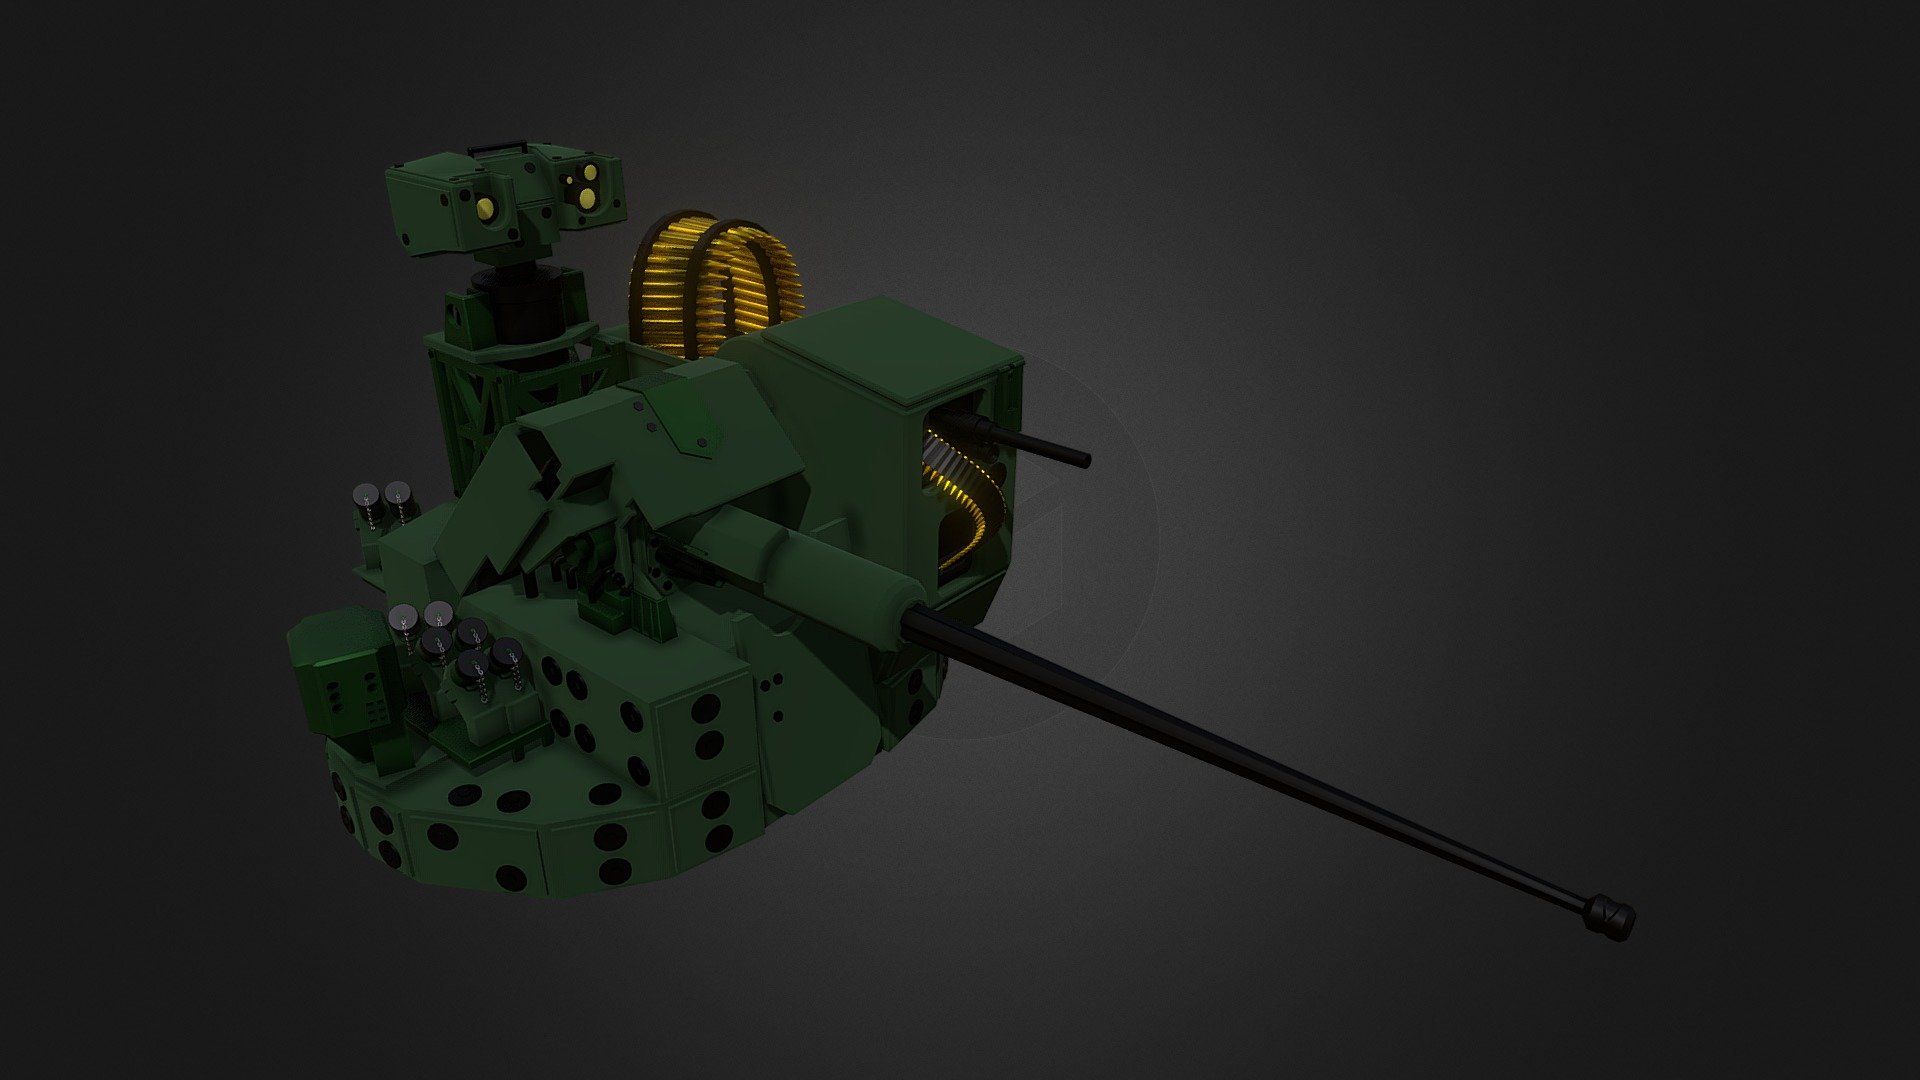 Modeled in Blender 3.2

UT-30BR: This weapons system has, as a technological differential, the functionality automatic target tracking , which allows tracking the target without human interference, and hunter-killer, which allows the commander to designate targets for the shooter, through his observation post, independently of this soldier. Equipped with the Brazilian army's Guarani armored vehicle.

UT-30BR: Este sistema de armas possui, como diferencial tecnológico, a funcionalidade automatic target tracking , que possibilita o acompanhamento do alvo sem interferência humana, e hunter-killer, que possibilita ao comandante designar alvos para o atirador, por meio de seu posto de observação, independentemente deste militar. Equipado no blindado Guarani do exército Brasileiro 3d model